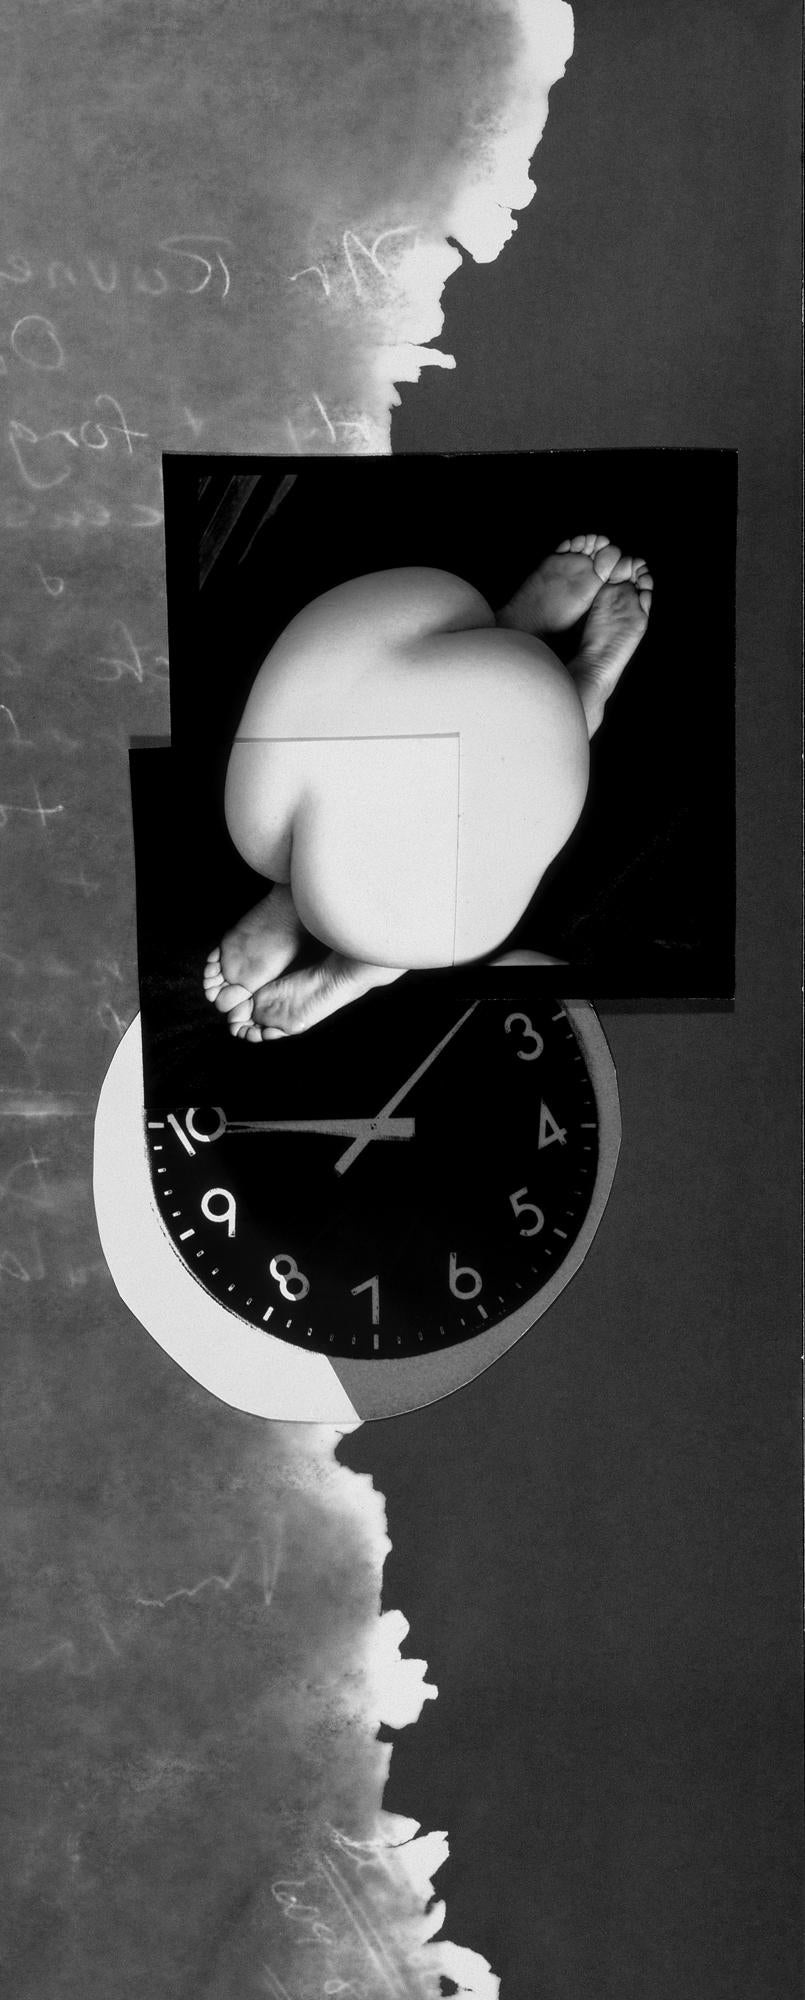 Jenny Lynn Nude Photograph - Doubleend: framed abstract black & white photo collage w/ nude, clock, clouds